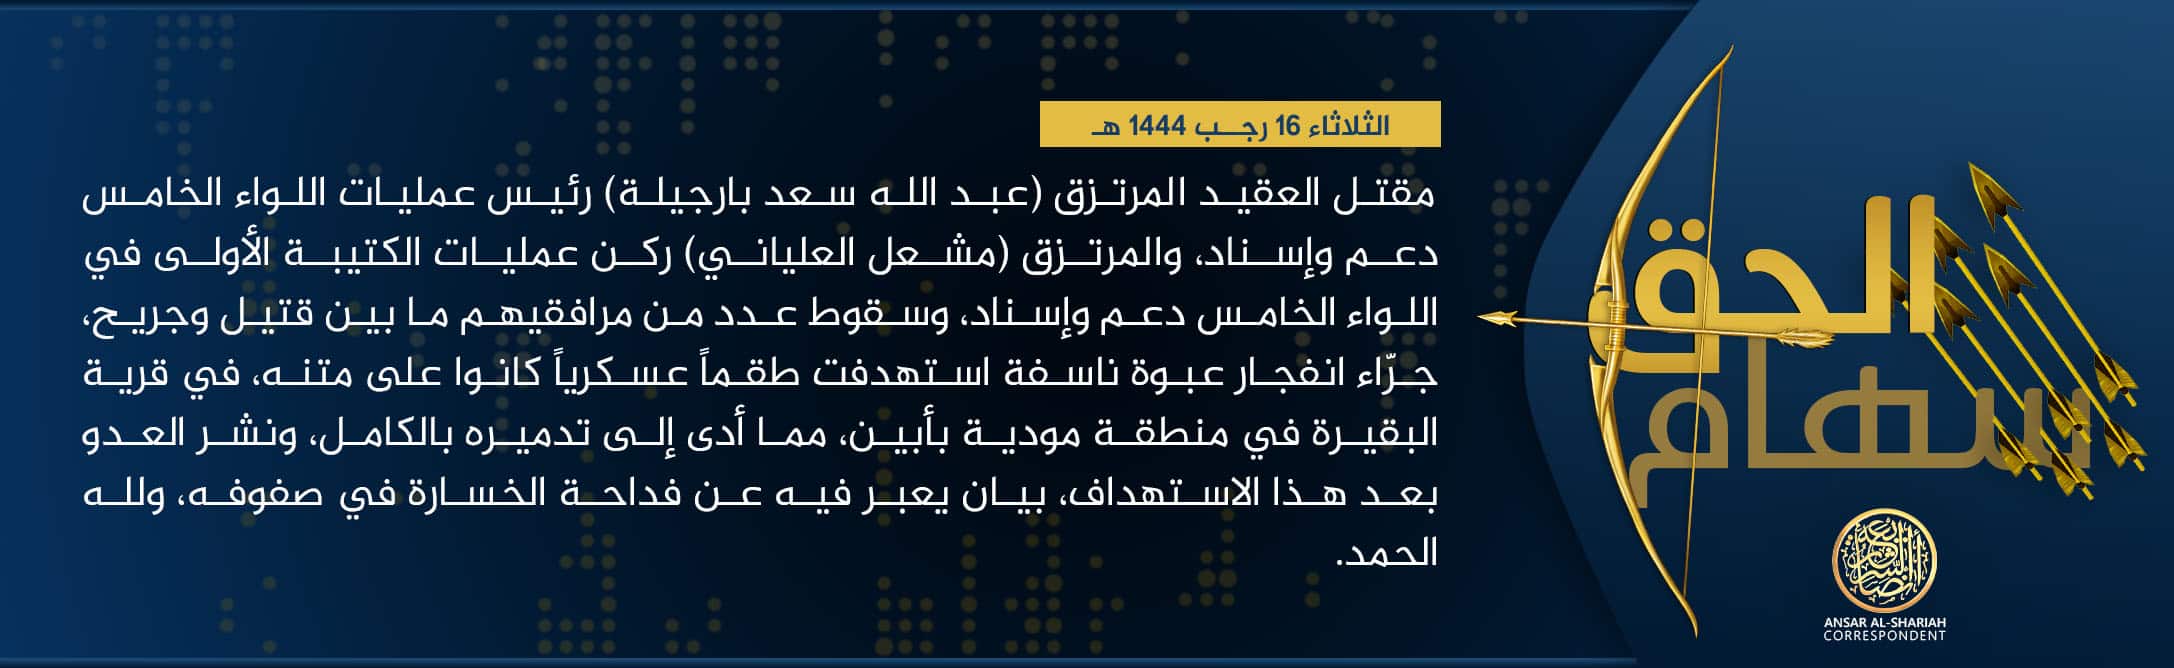 (Claim) Ansar al-Sharia in Yemen (ASY / AQAP / AQY) Killed the Head of Operations of the Fifth Brigade, Colonel Abdullah Saad Barjeela, Along With the Head of Operations of the First Battalion in the Fifth Brigade, Mishaal al-Alayani, and Killed and Injured Others in an IED Attack on a Convoy in Al-Baqira, Mudiya region, Abyan, Yemen - 7 February 2023